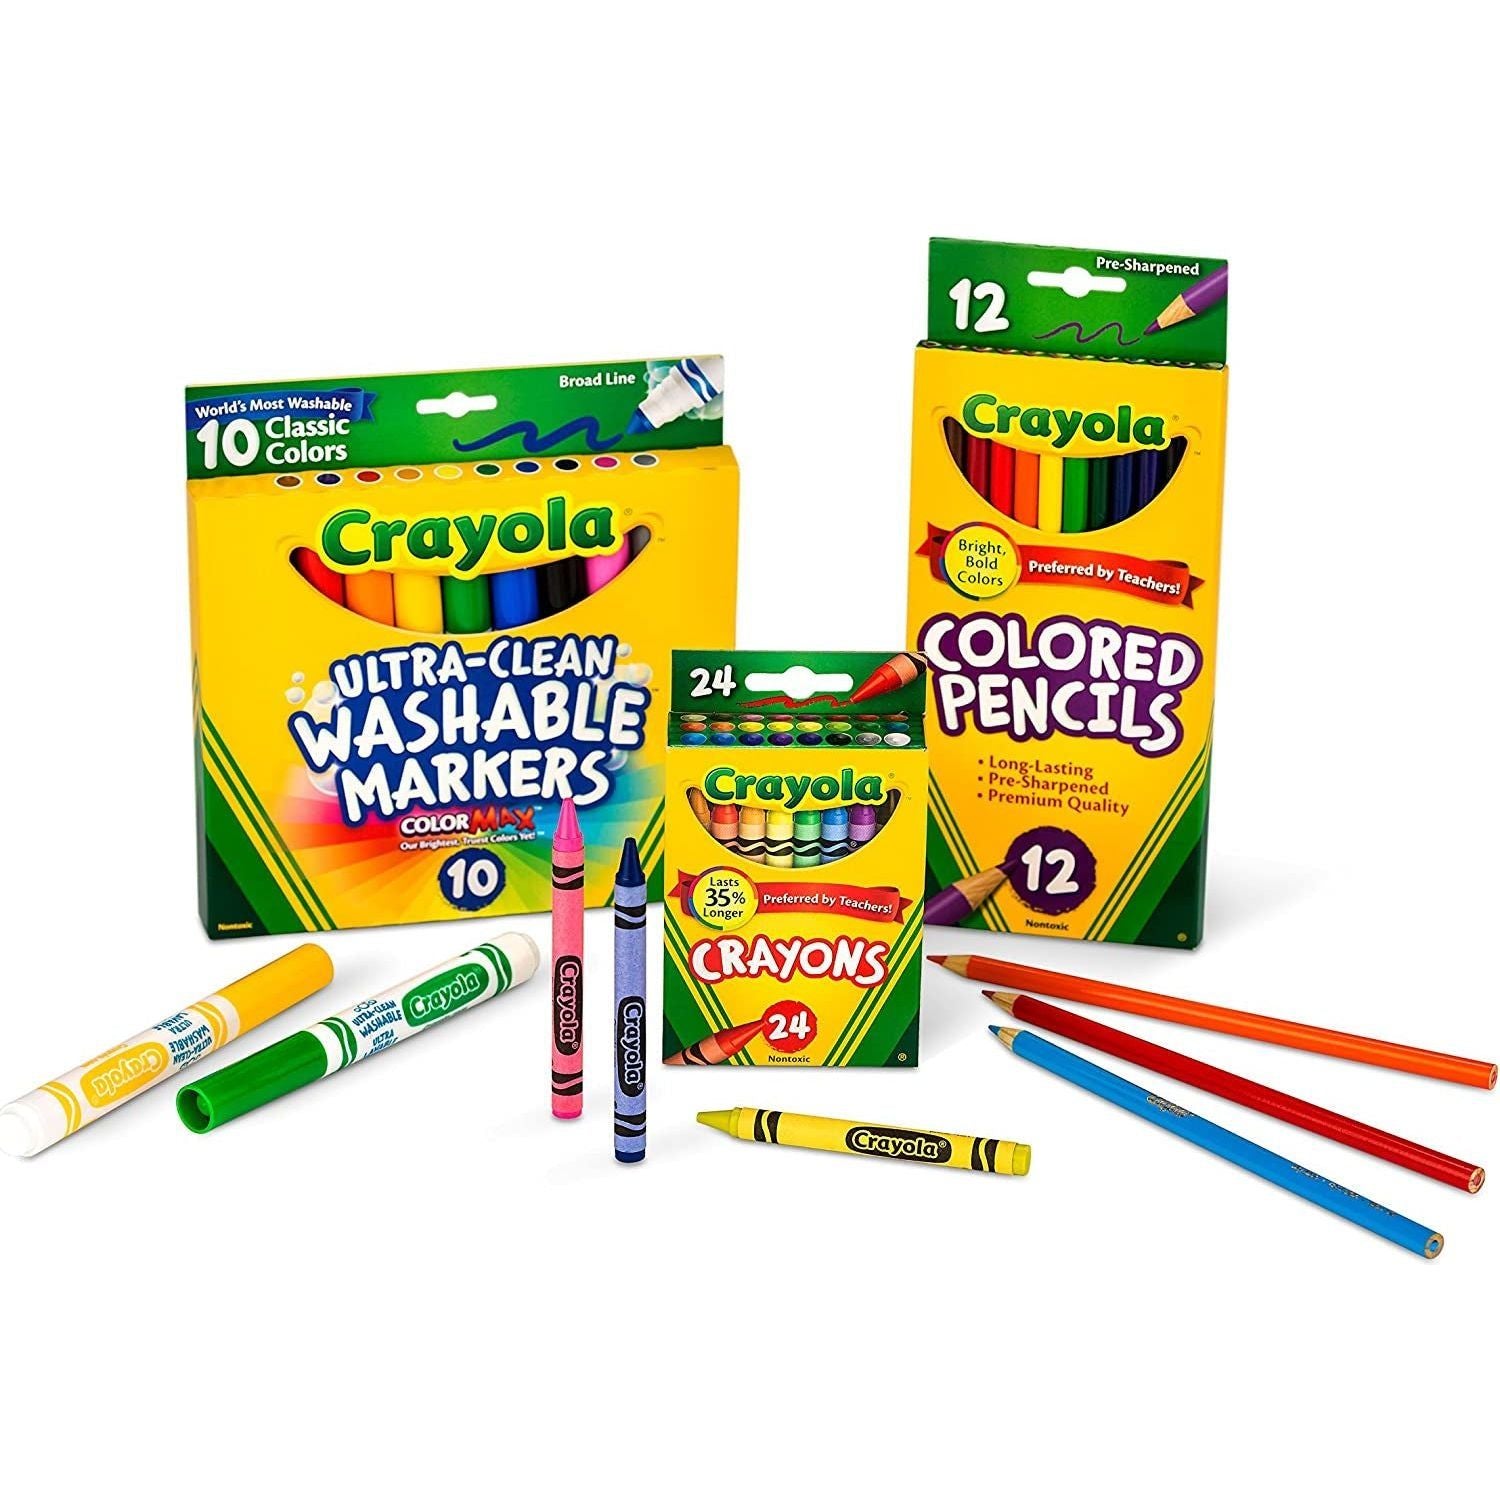 Back to School Supplies, Grades 3-5, Ages 7, 8, 9, 10, Contains 24 Crayons, 10 Washable Broad Line Markers, and 12 Colored Pencils [Amazon Exclusive]